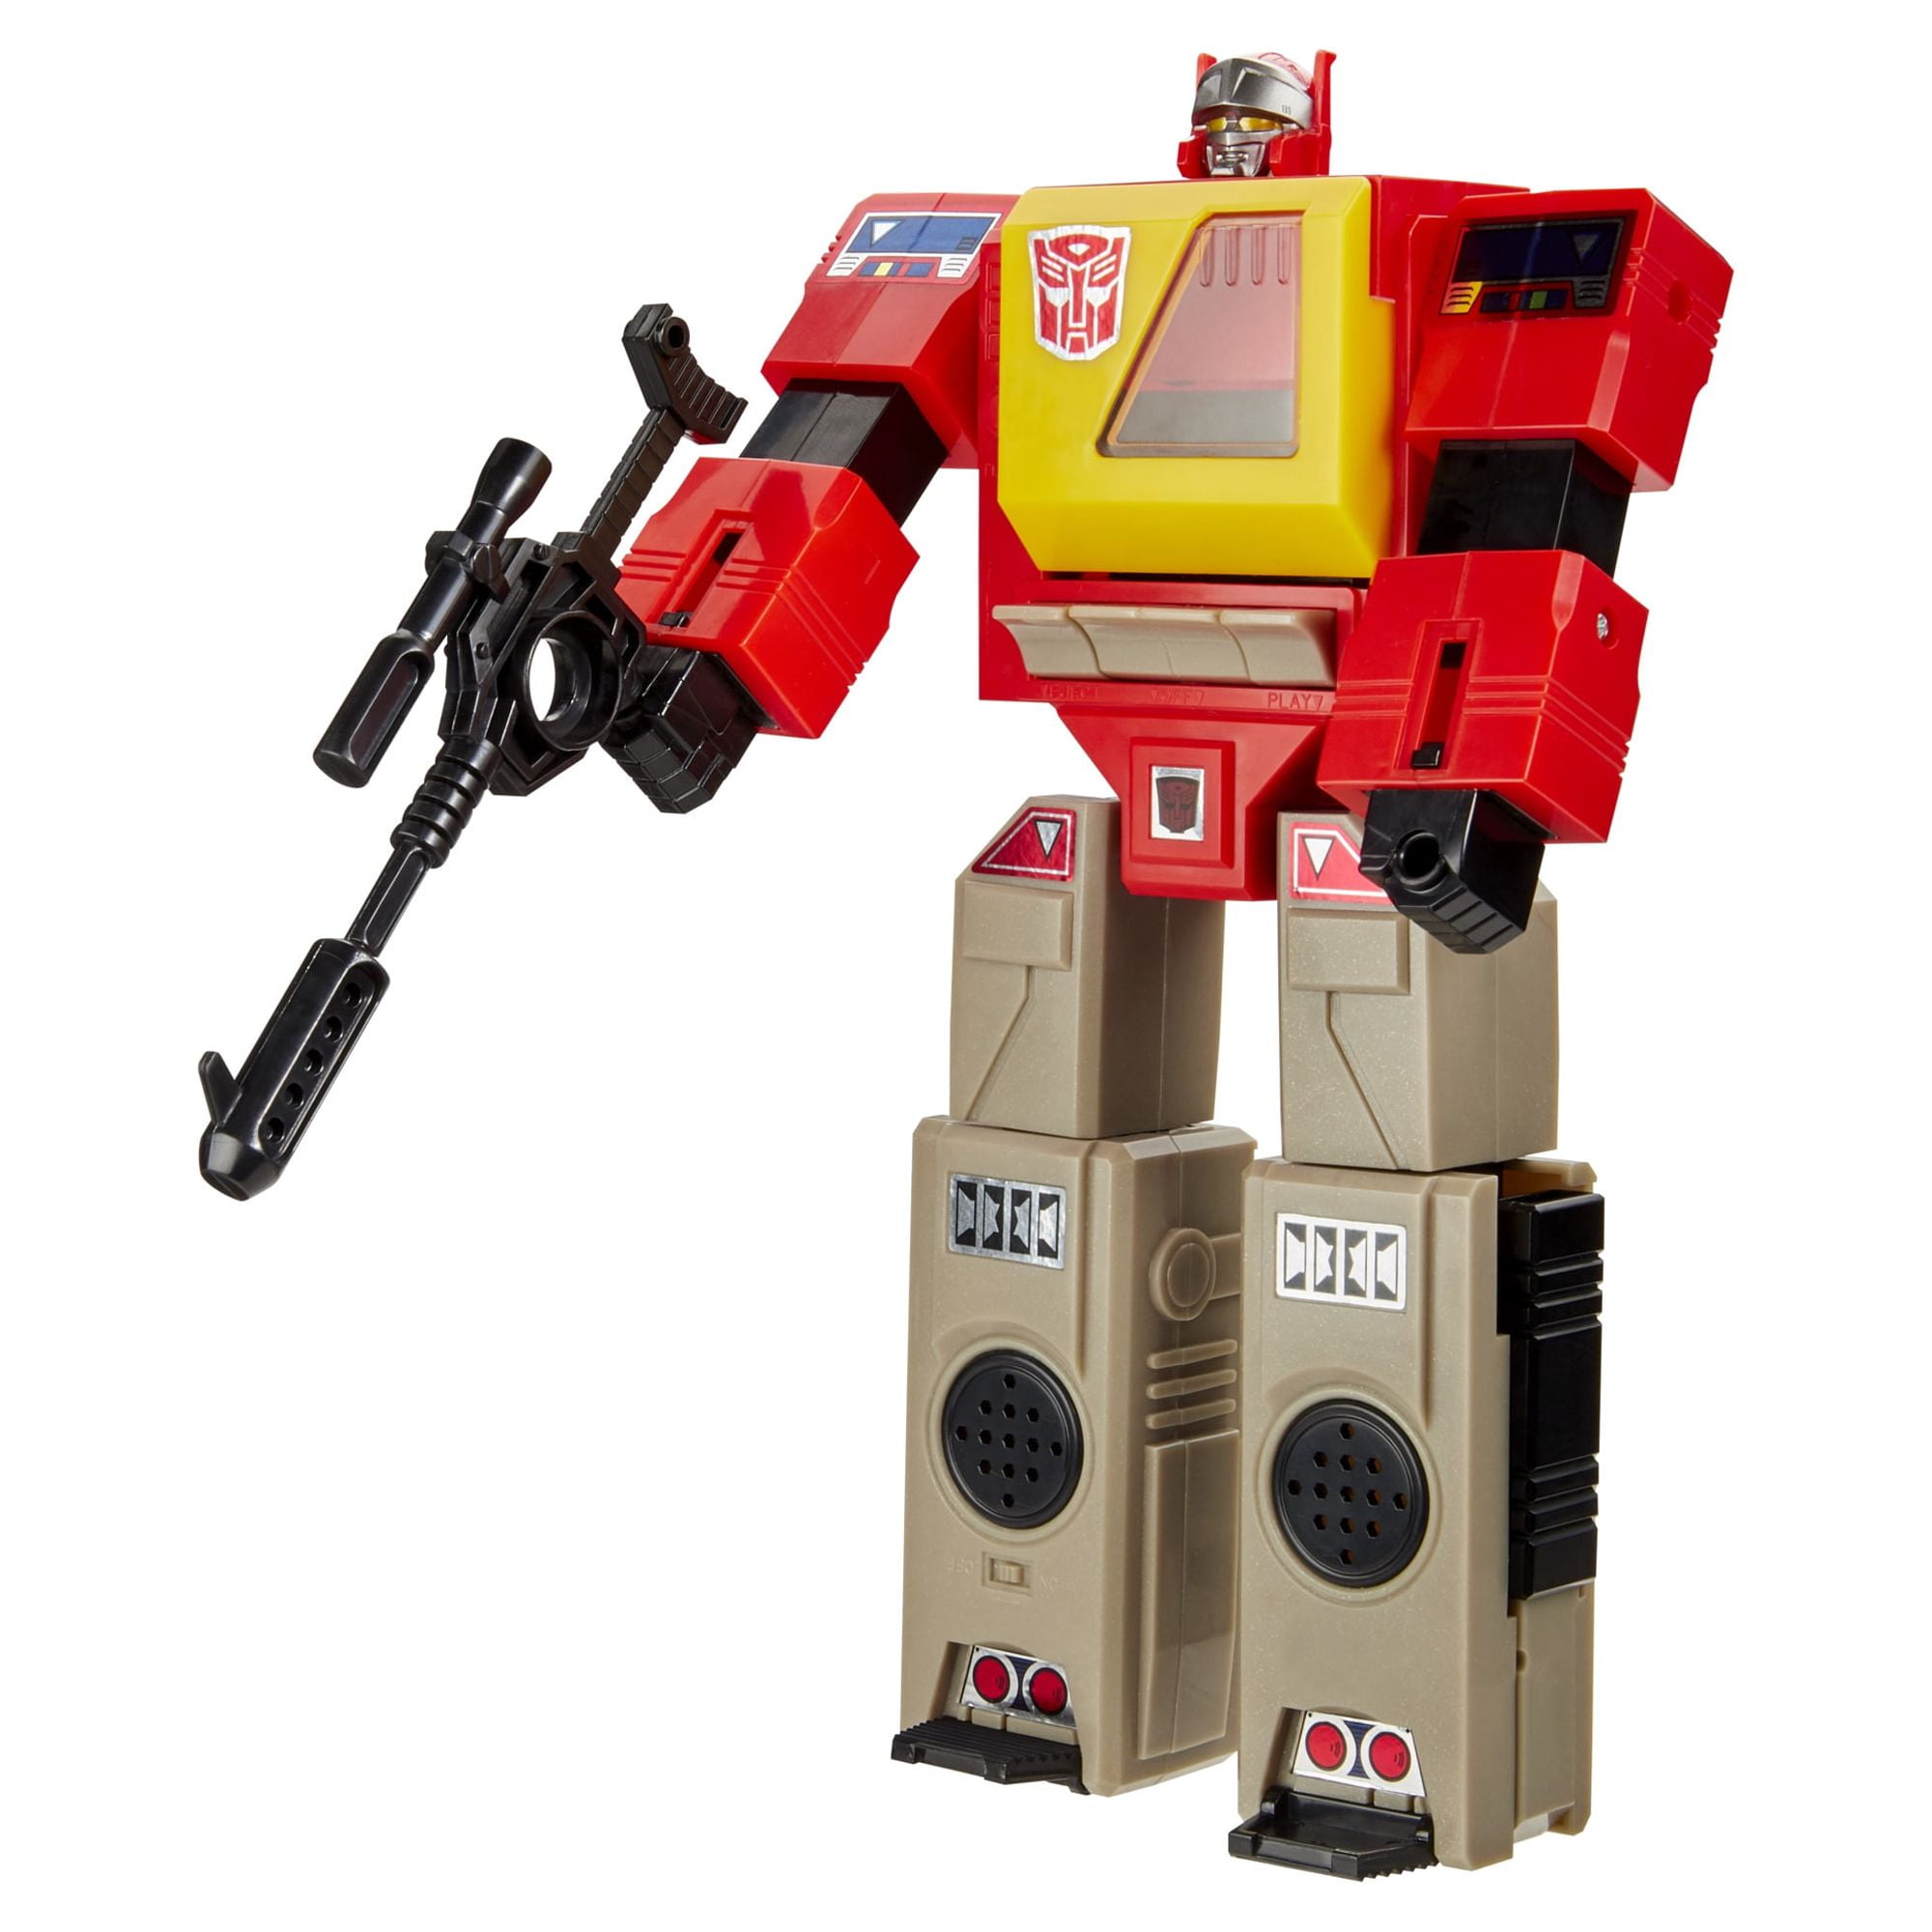 Transformers: Vintage G1 Kids Toy Action Figure for Boys and Girls (3”)